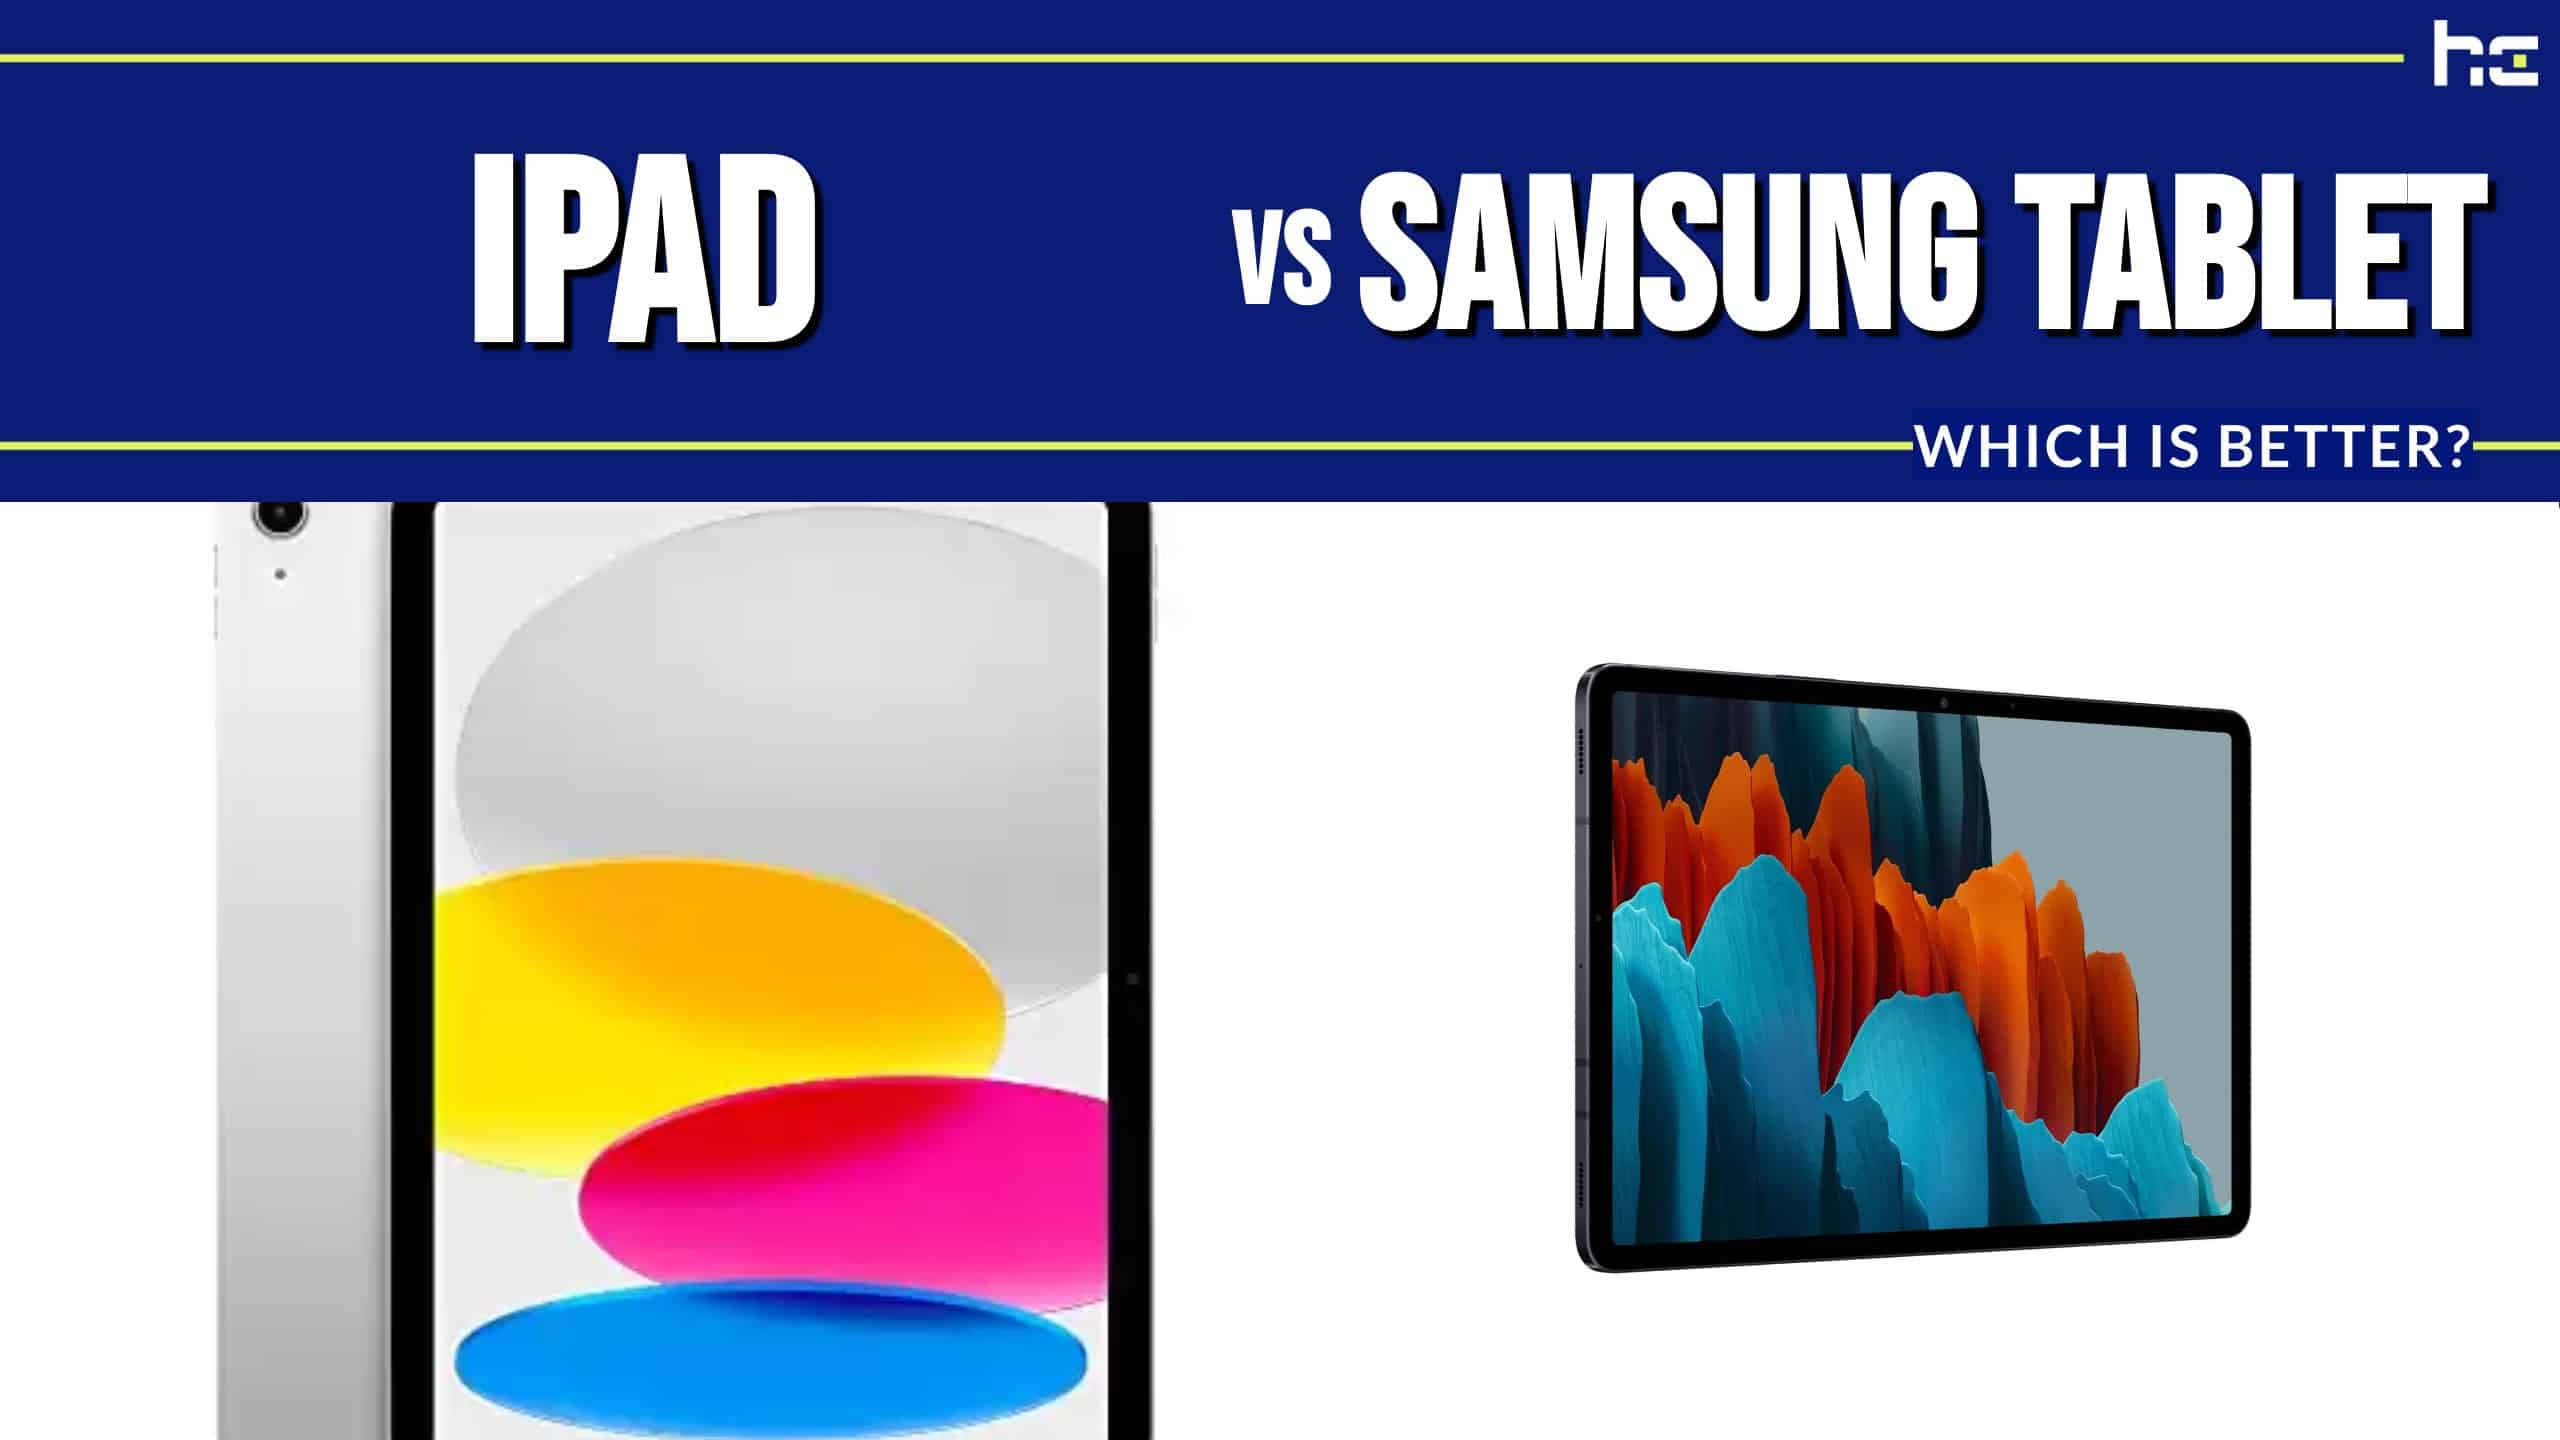 iPad vs Samsung Tablets Full Comparison, Specs, Which Is Better